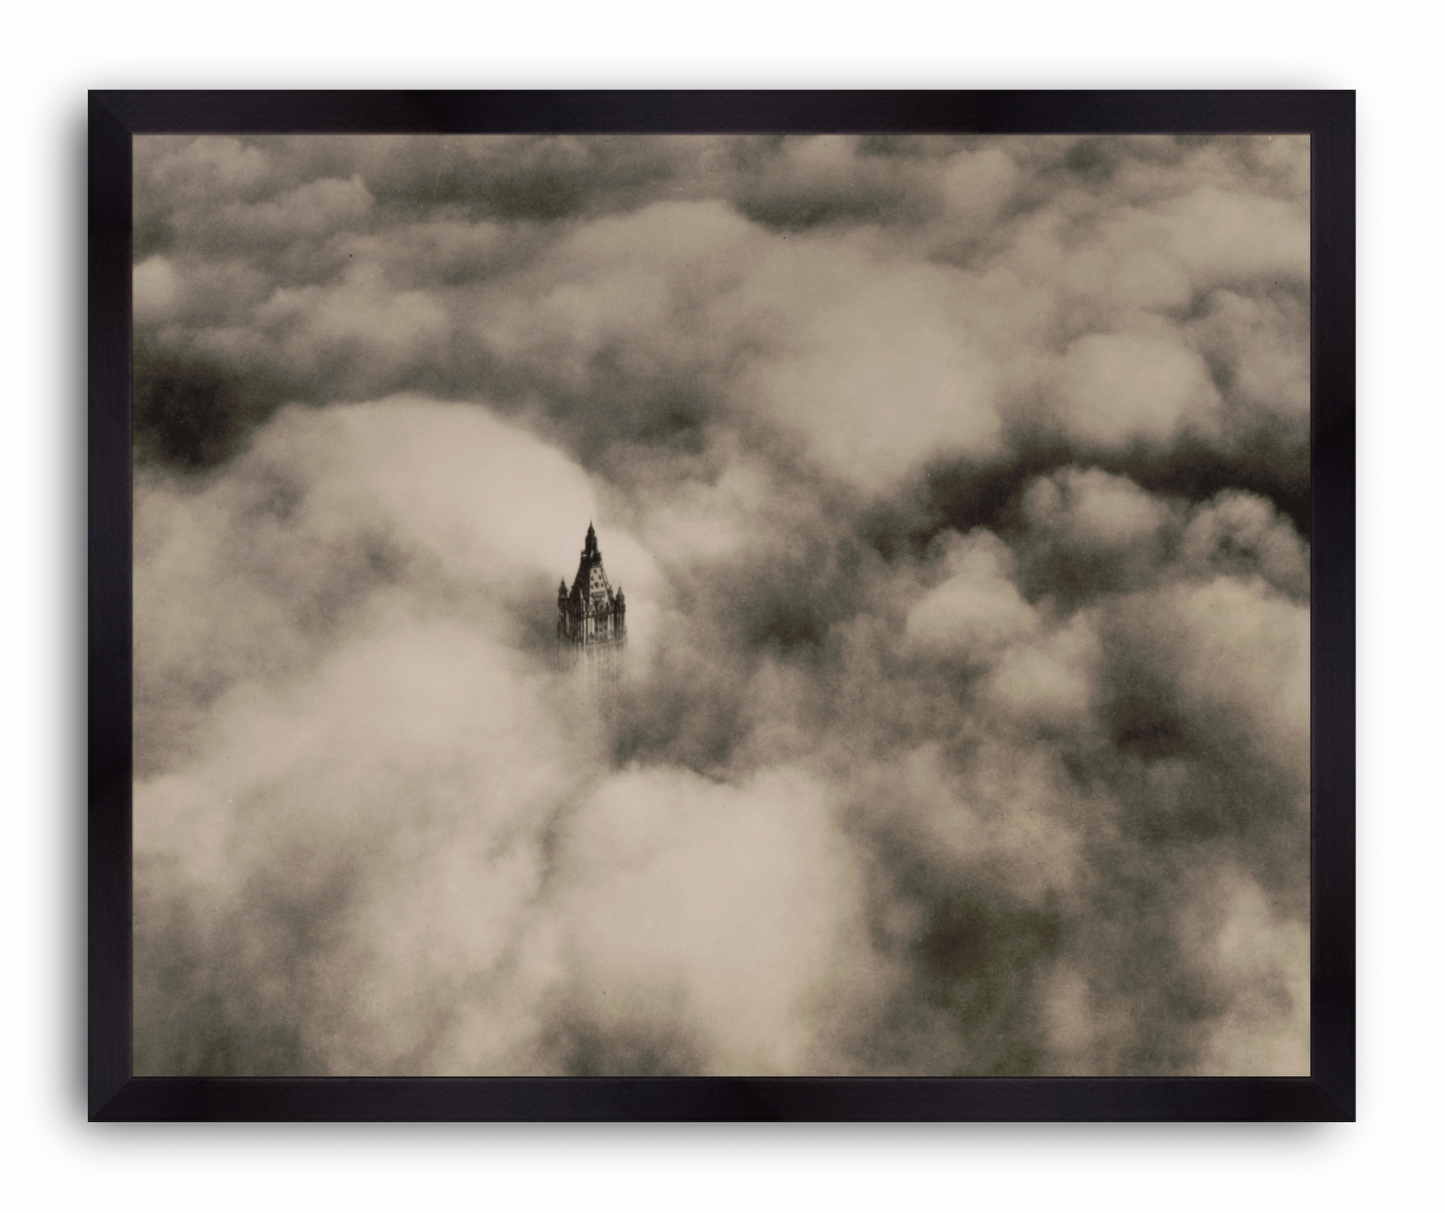 Woolworth Tower in the Clouds, New York City, 1928